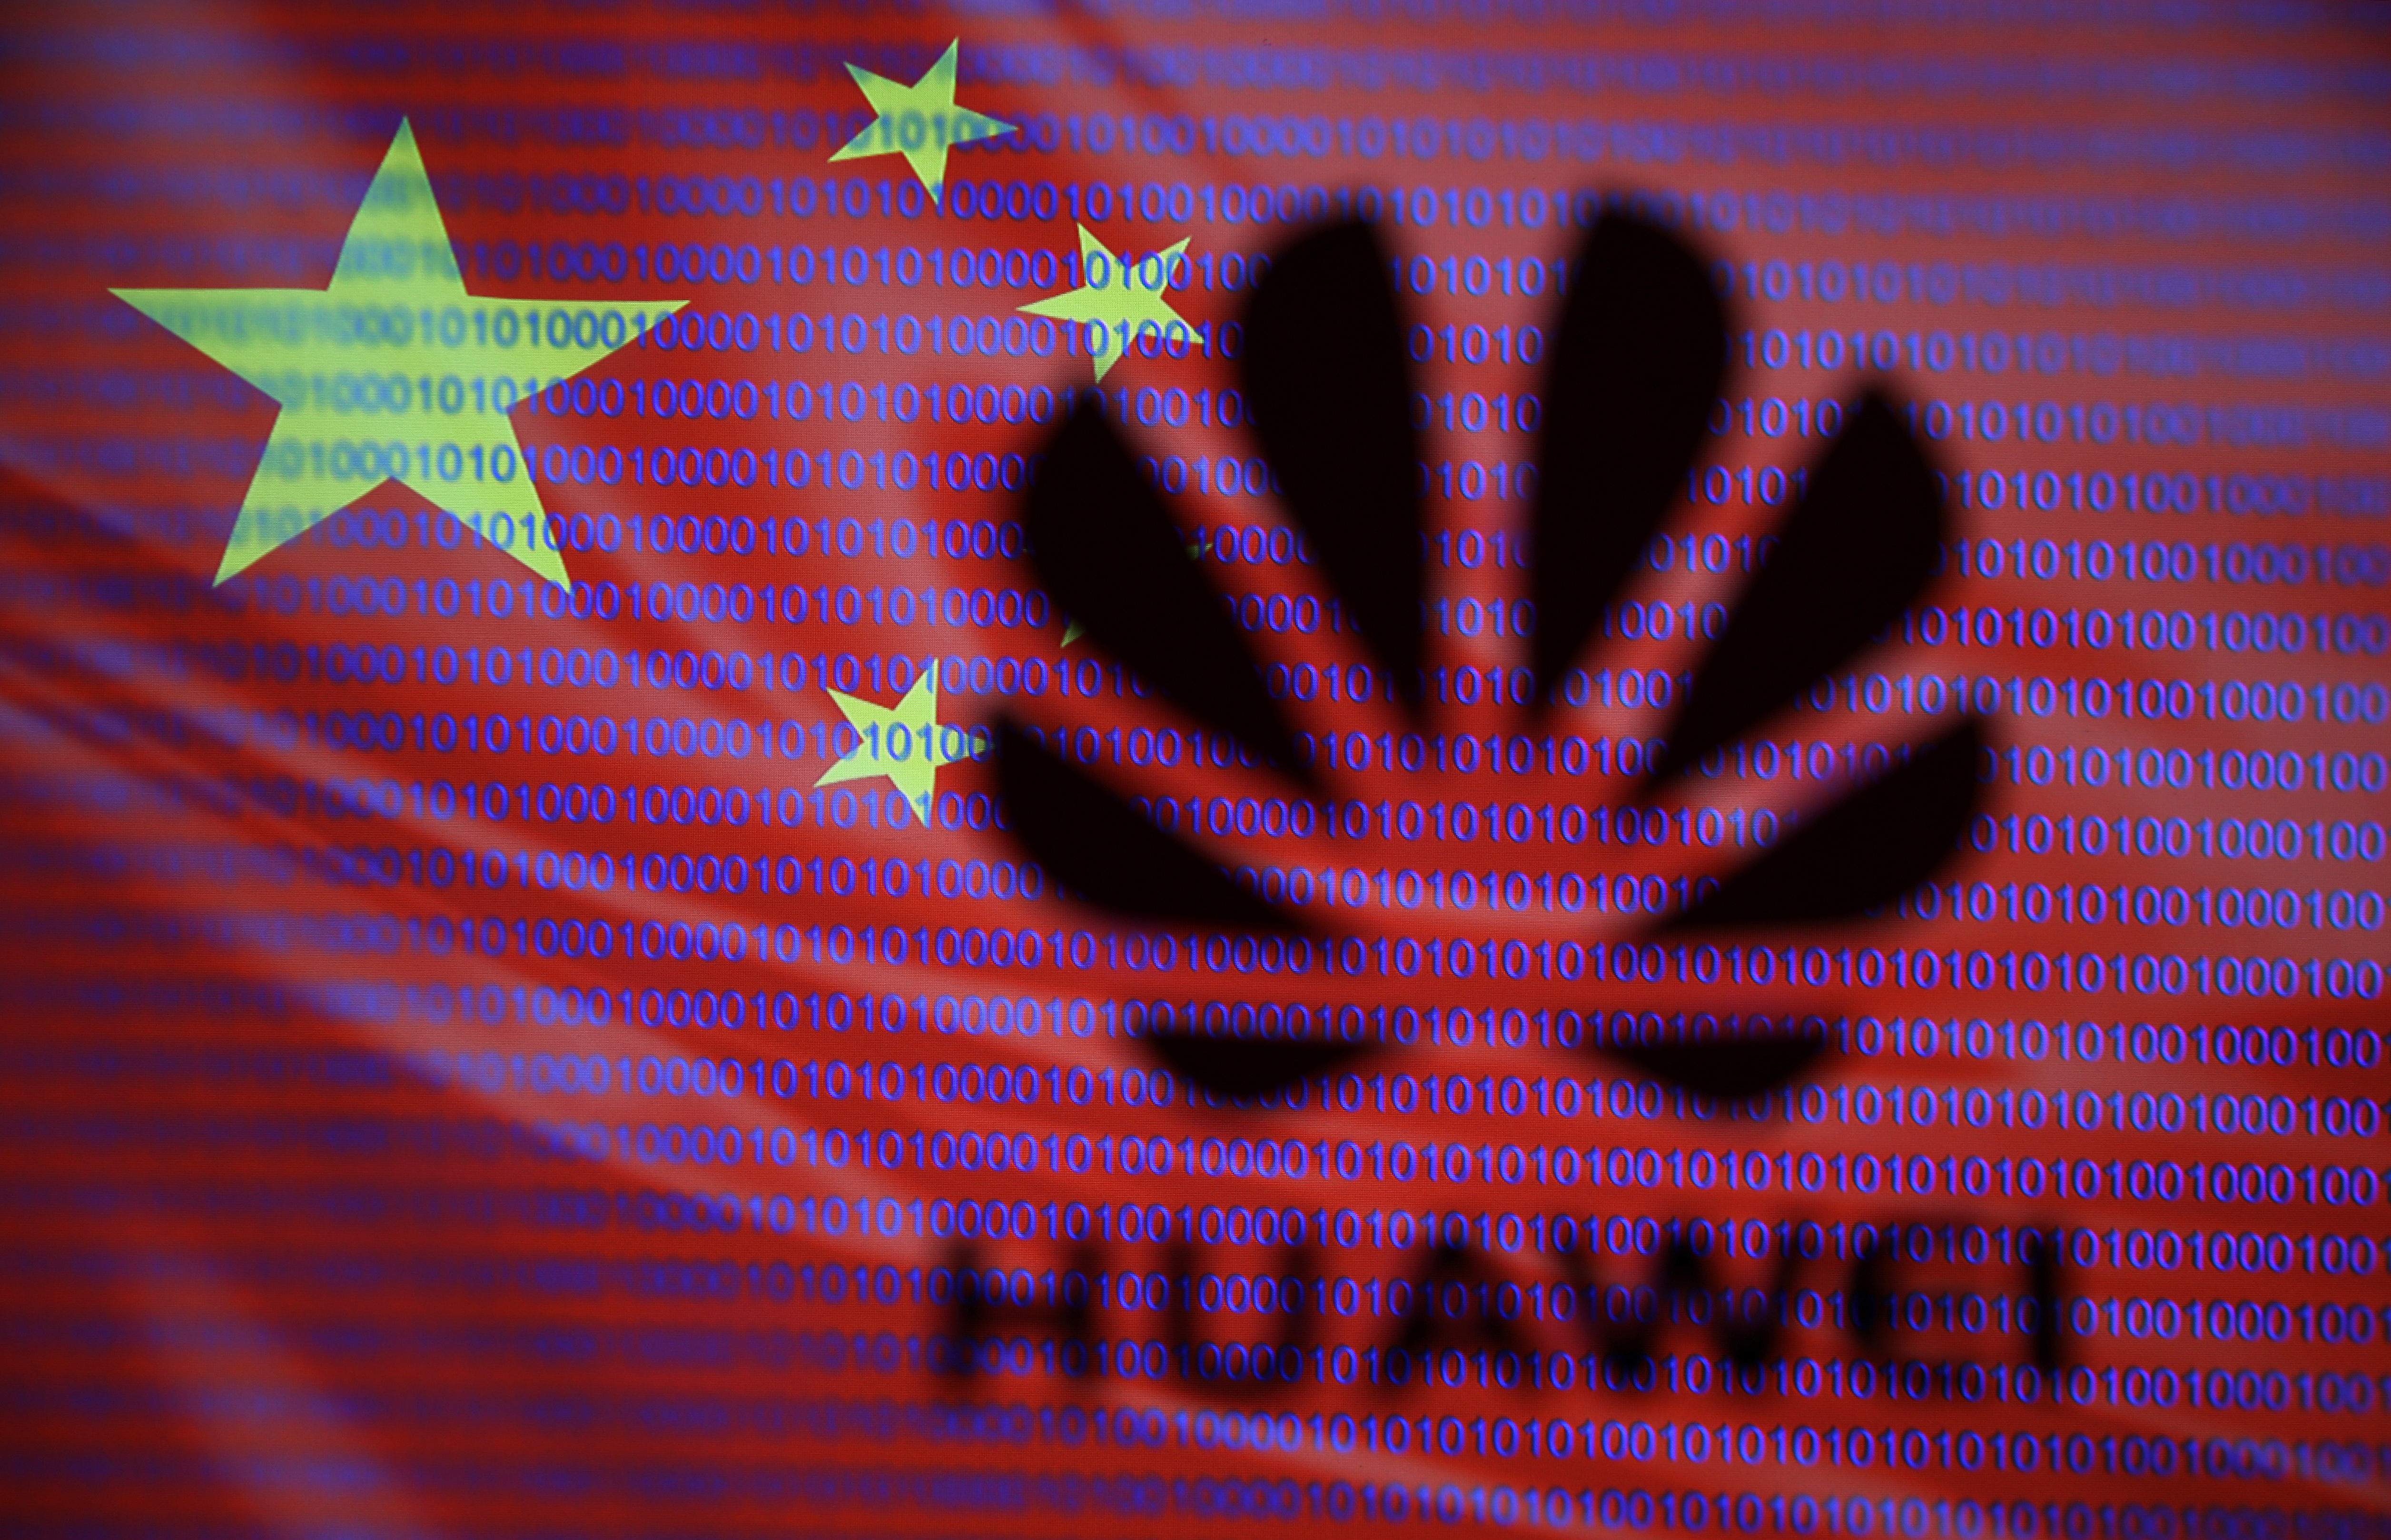 A 3-D printed Huawei logo is seen in front of displayed flag of China and cyber code in this illustration